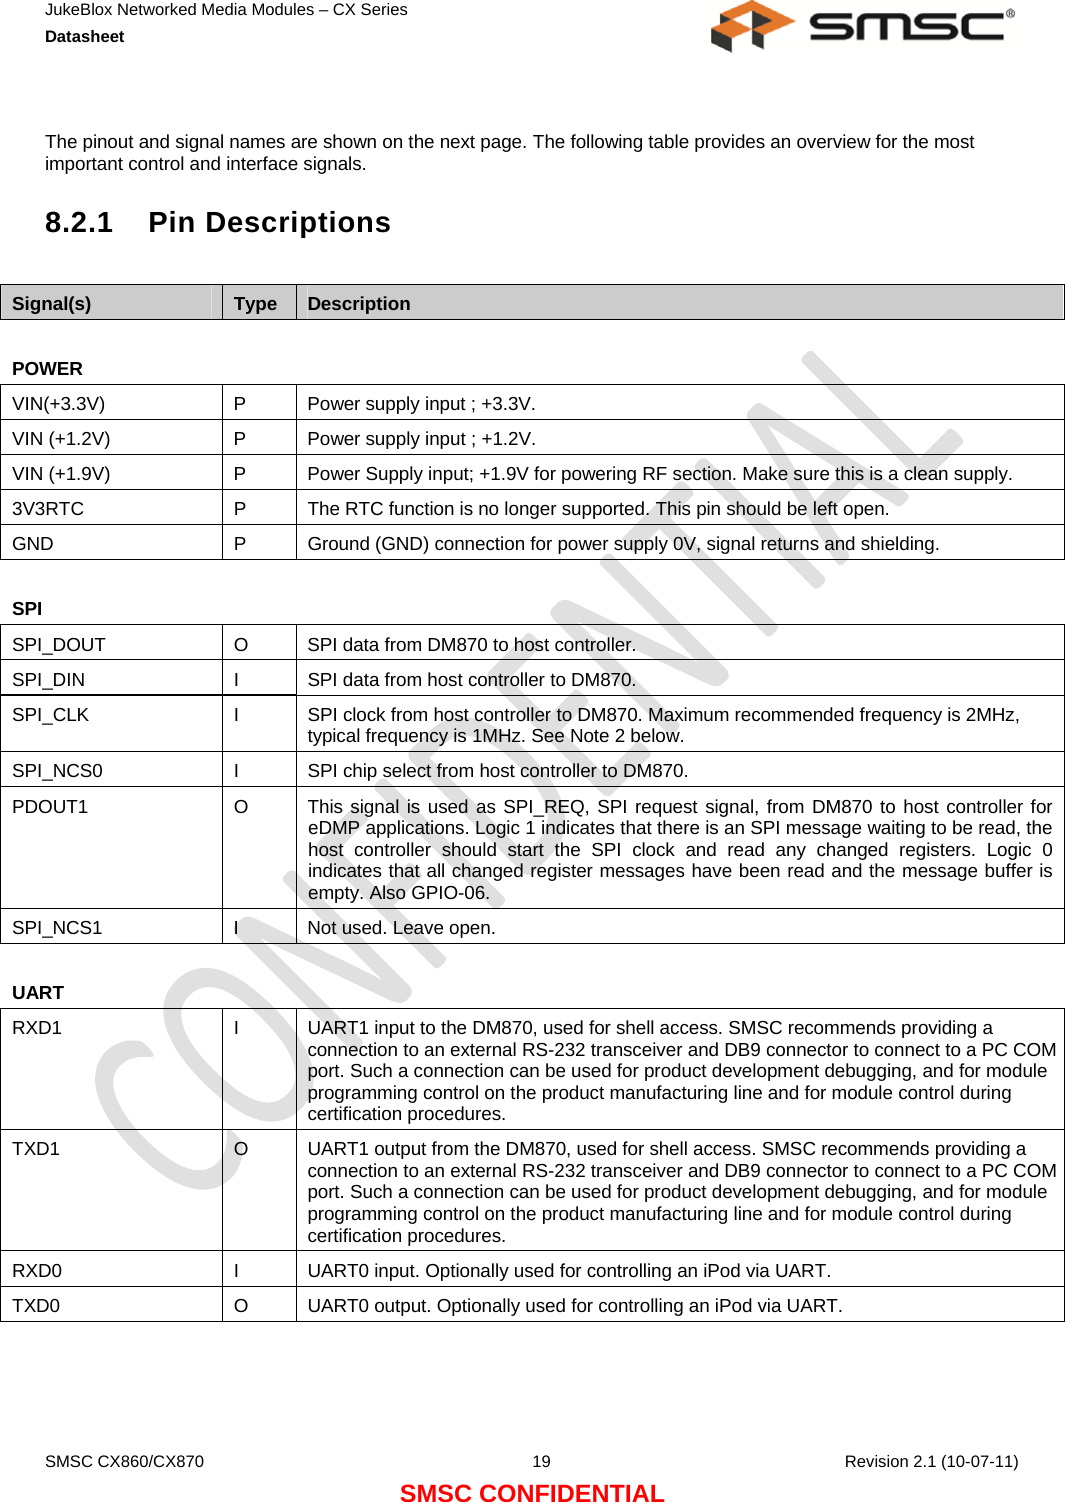 JukeBlox Networked Media Modules – CX Series  Datasheet    SMSC CX860/CX870  19    Revision 2.1 (10-07-11) SMSC CONFIDENTIAL  The pinout and signal names are shown on the next page. The following table provides an overview for the most important control and interface signals. 8.2.1 Pin Descriptions  Signal(s)  Type  Description  POWER   VIN(+3.3V)  P  Power supply input ; +3.3V. VIN (+1.2V)  P  Power supply input ; +1.2V. VIN (+1.9V)  P  Power Supply input; +1.9V for powering RF section. Make sure this is a clean supply. 3V3RTC  P  The RTC function is no longer supported. This pin should be left open. GND  P  Ground (GND) connection for power supply 0V, signal returns and shielding.  SPI   SPI_DOUT  O  SPI data from DM870 to host controller. SPI_DIN  I  SPI data from host controller to DM870. SPI_CLK  I  SPI clock from host controller to DM870. Maximum recommended frequency is 2MHz, typical frequency is 1MHz. See Note 2 below. SPI_NCS0  I  SPI chip select from host controller to DM870. PDOUT1  O  This signal is used as SPI_REQ, SPI request signal, from DM870 to host controller for eDMP applications. Logic 1 indicates that there is an SPI message waiting to be read, the host controller should start the SPI clock and read any changed registers. Logic 0 indicates that all changed register messages have been read and the message buffer is empty. Also GPIO-06. SPI_NCS1  I  Not used. Leave open.  UART   RXD1  I  UART1 input to the DM870, used for shell access. SMSC recommends providing a connection to an external RS-232 transceiver and DB9 connector to connect to a PC COM port. Such a connection can be used for product development debugging, and for module programming control on the product manufacturing line and for module control during certification procedures. TXD1  O  UART1 output from the DM870, used for shell access. SMSC recommends providing a connection to an external RS-232 transceiver and DB9 connector to connect to a PC COM port. Such a connection can be used for product development debugging, and for module programming control on the product manufacturing line and for module control during certification procedures. RXD0  I  UART0 input. Optionally used for controlling an iPod via UART. TXD0  O  UART0 output. Optionally used for controlling an iPod via UART. 